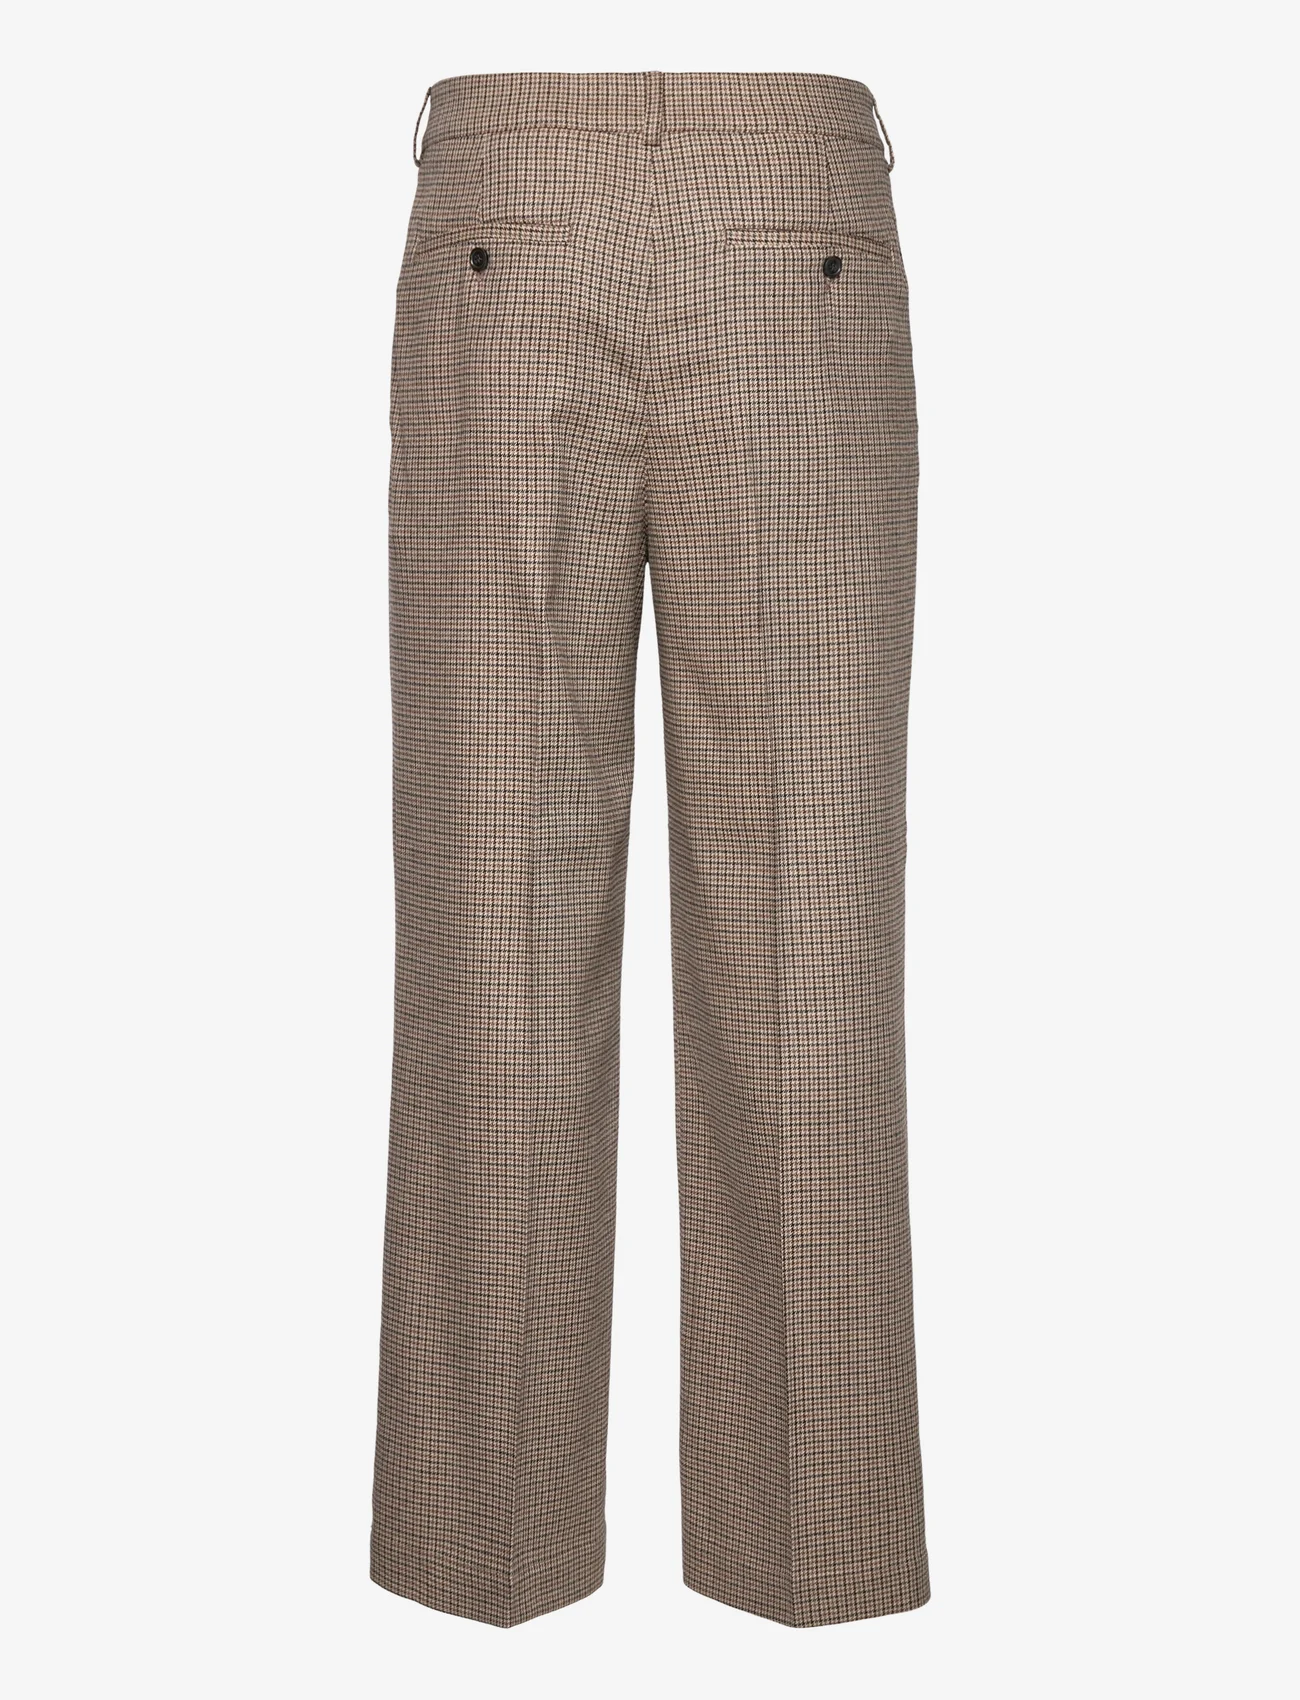 GANT - D2. PLEATED CHECKED SUIT PANT - pantalons - dry sand - 1